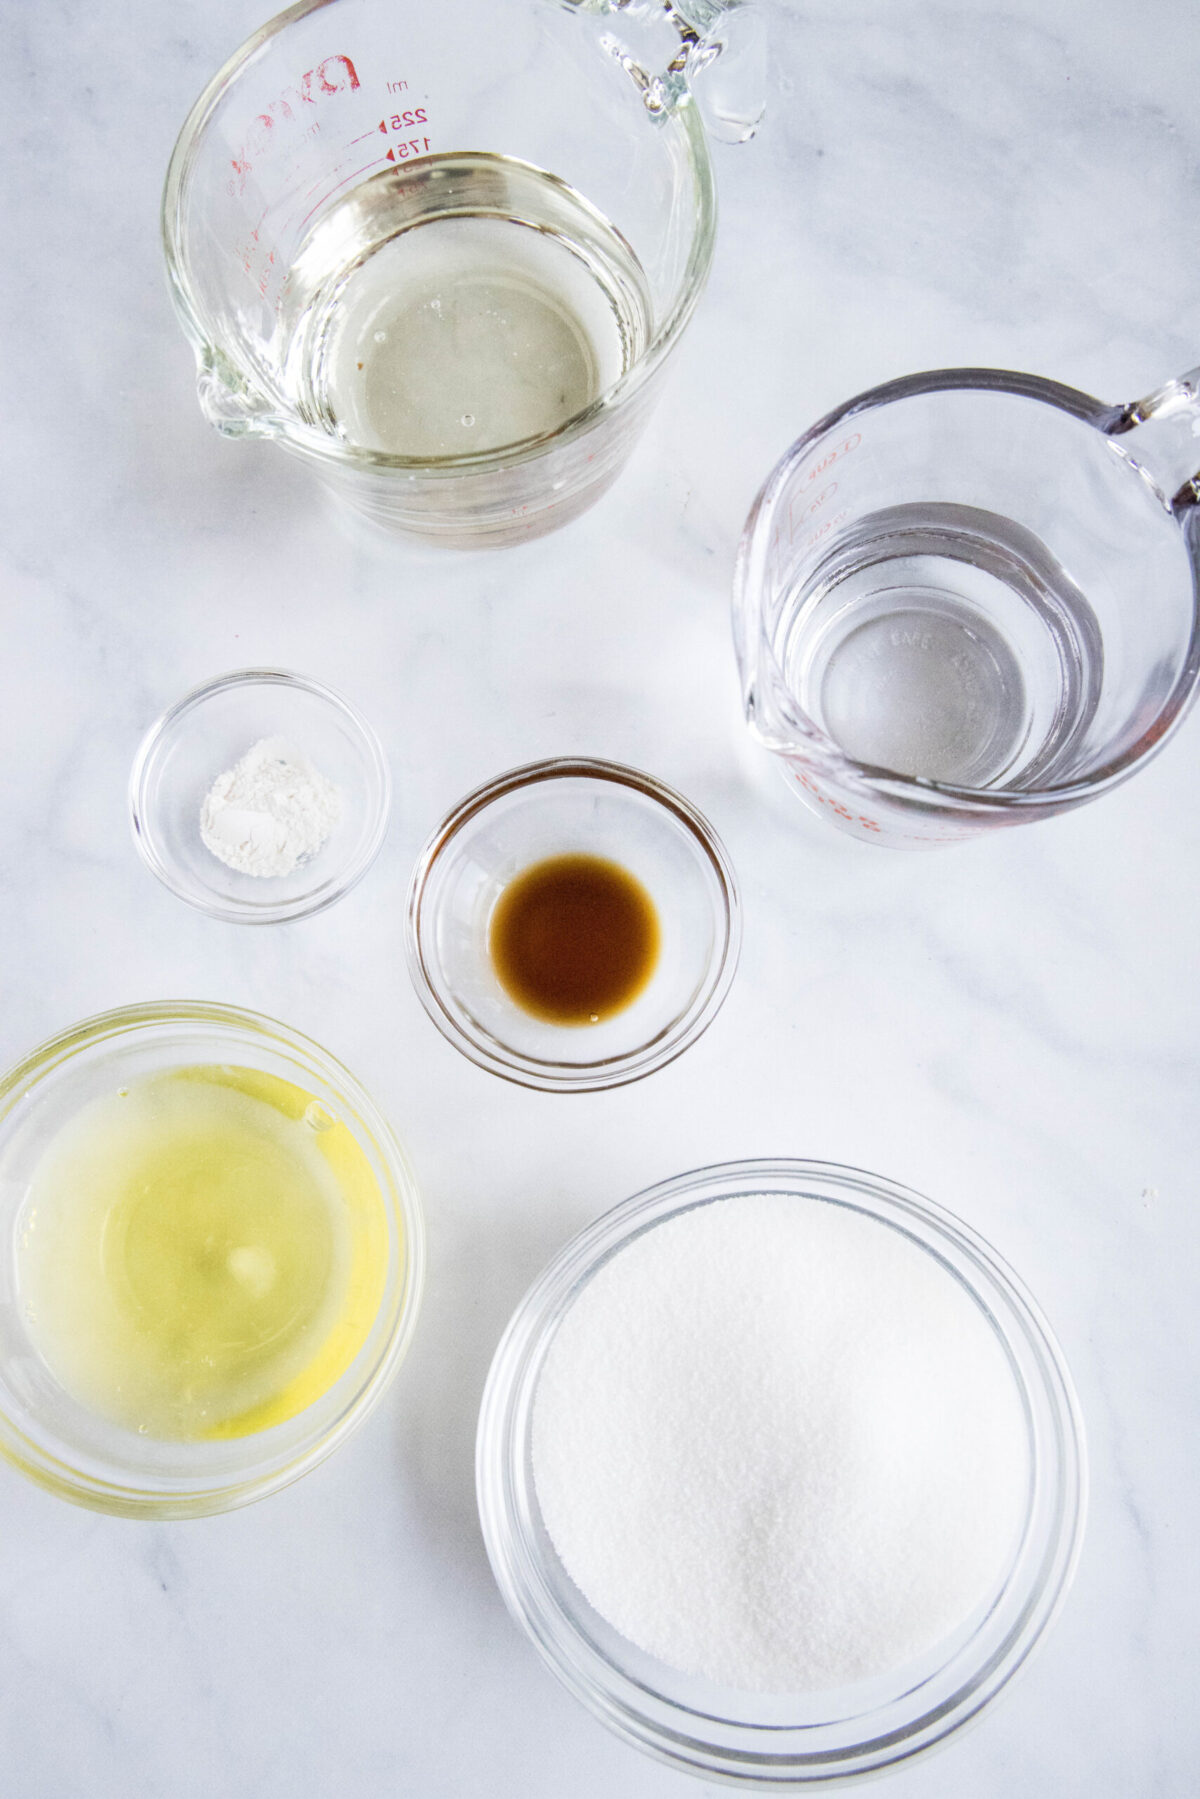 Overhead view of the ingredients needed for marshmallow fluff: a bowl of egg whites, a bowl of sugar, a pyrex of water, a bowl of vanilla, a pyrex of corn syrup, and a bowl of cream of tartar